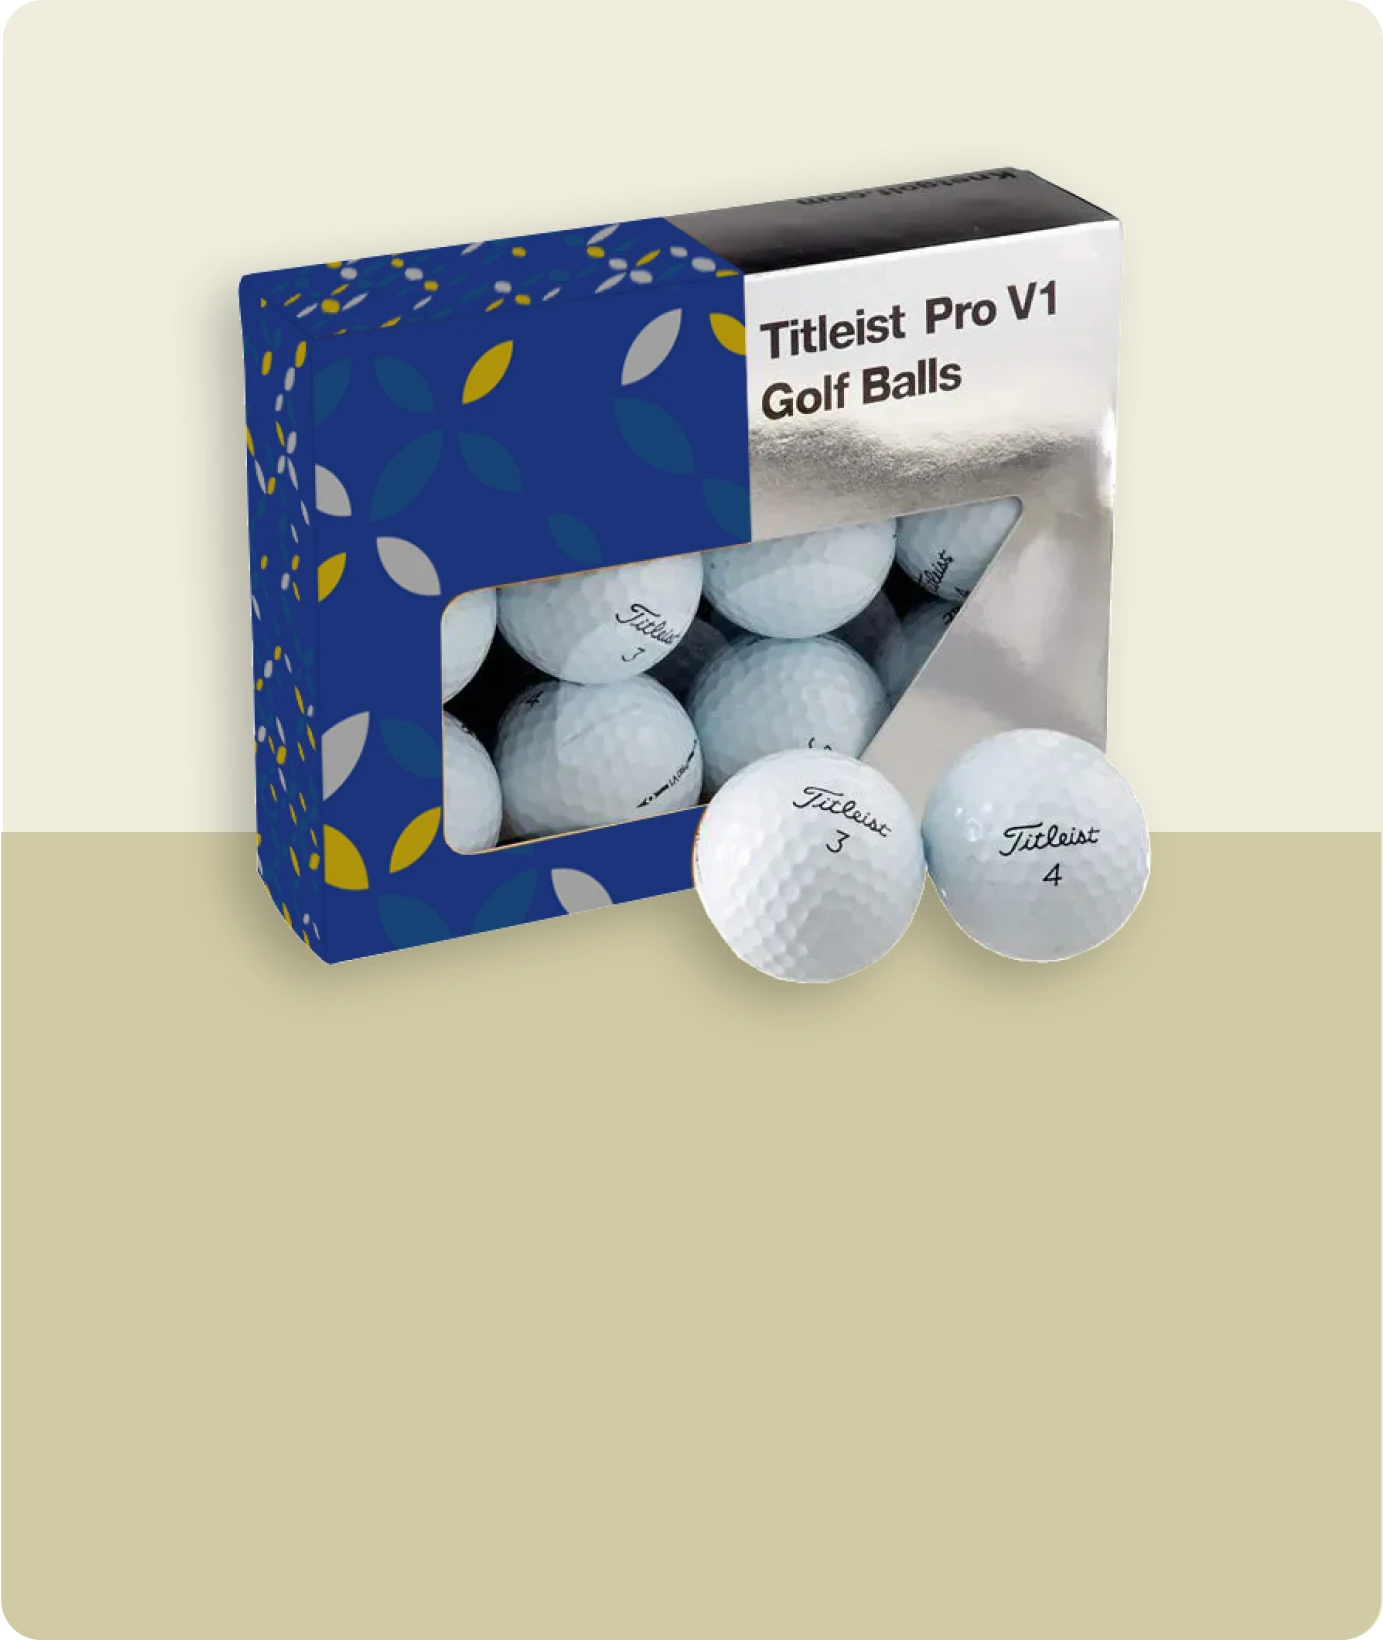 Golf Ball Boxes related products image | The Box Lane